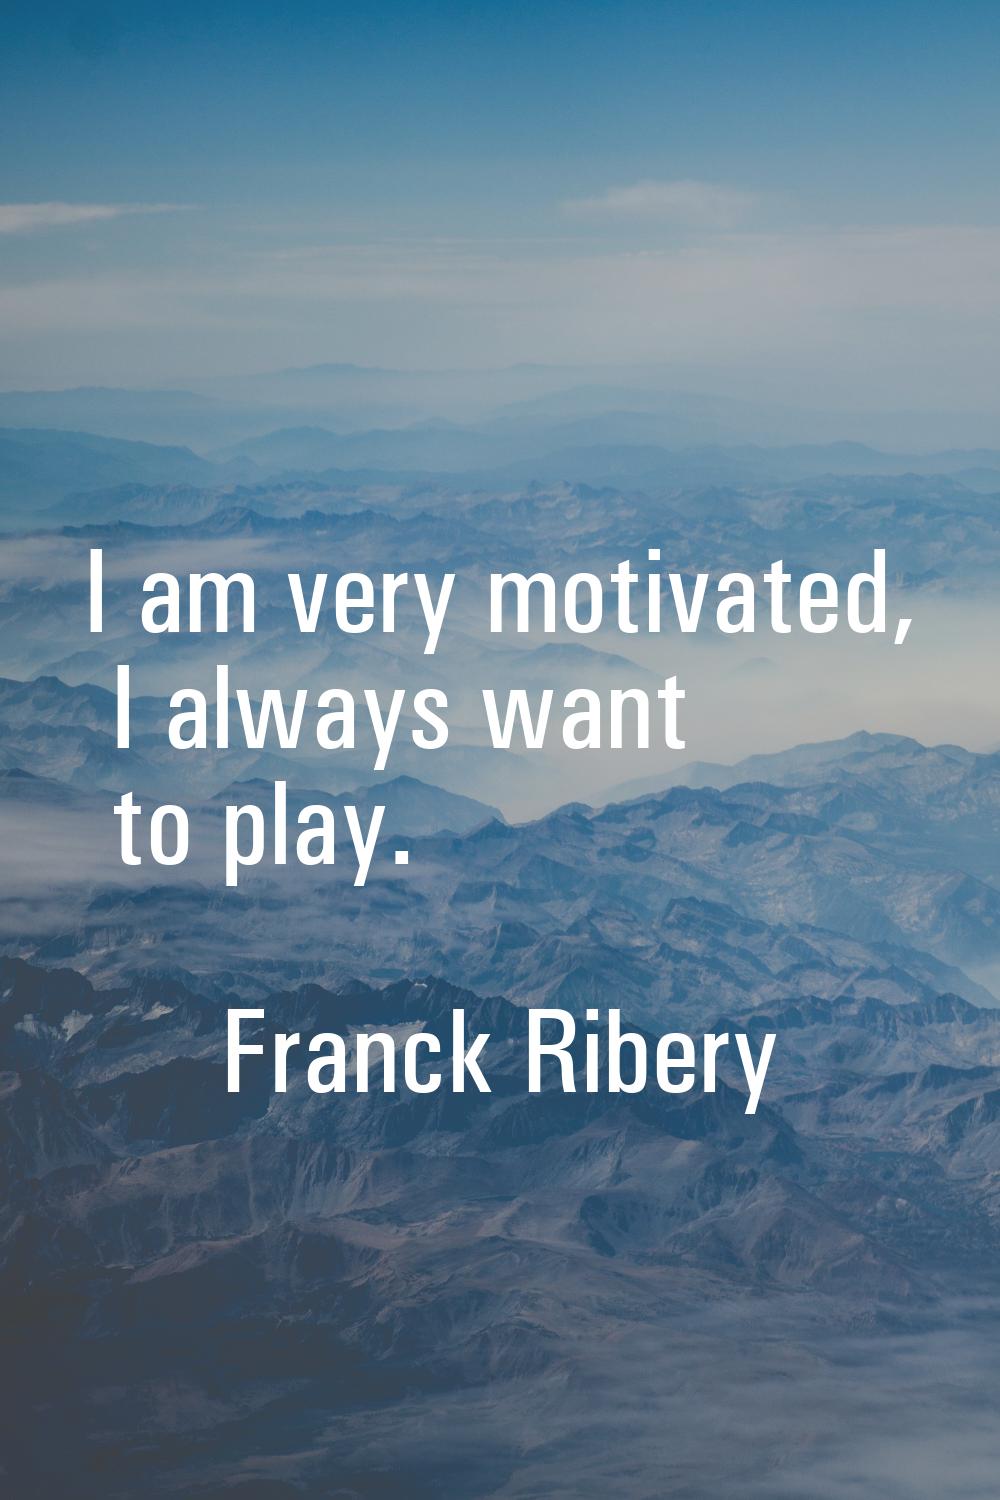 I am very motivated, I always want to play.